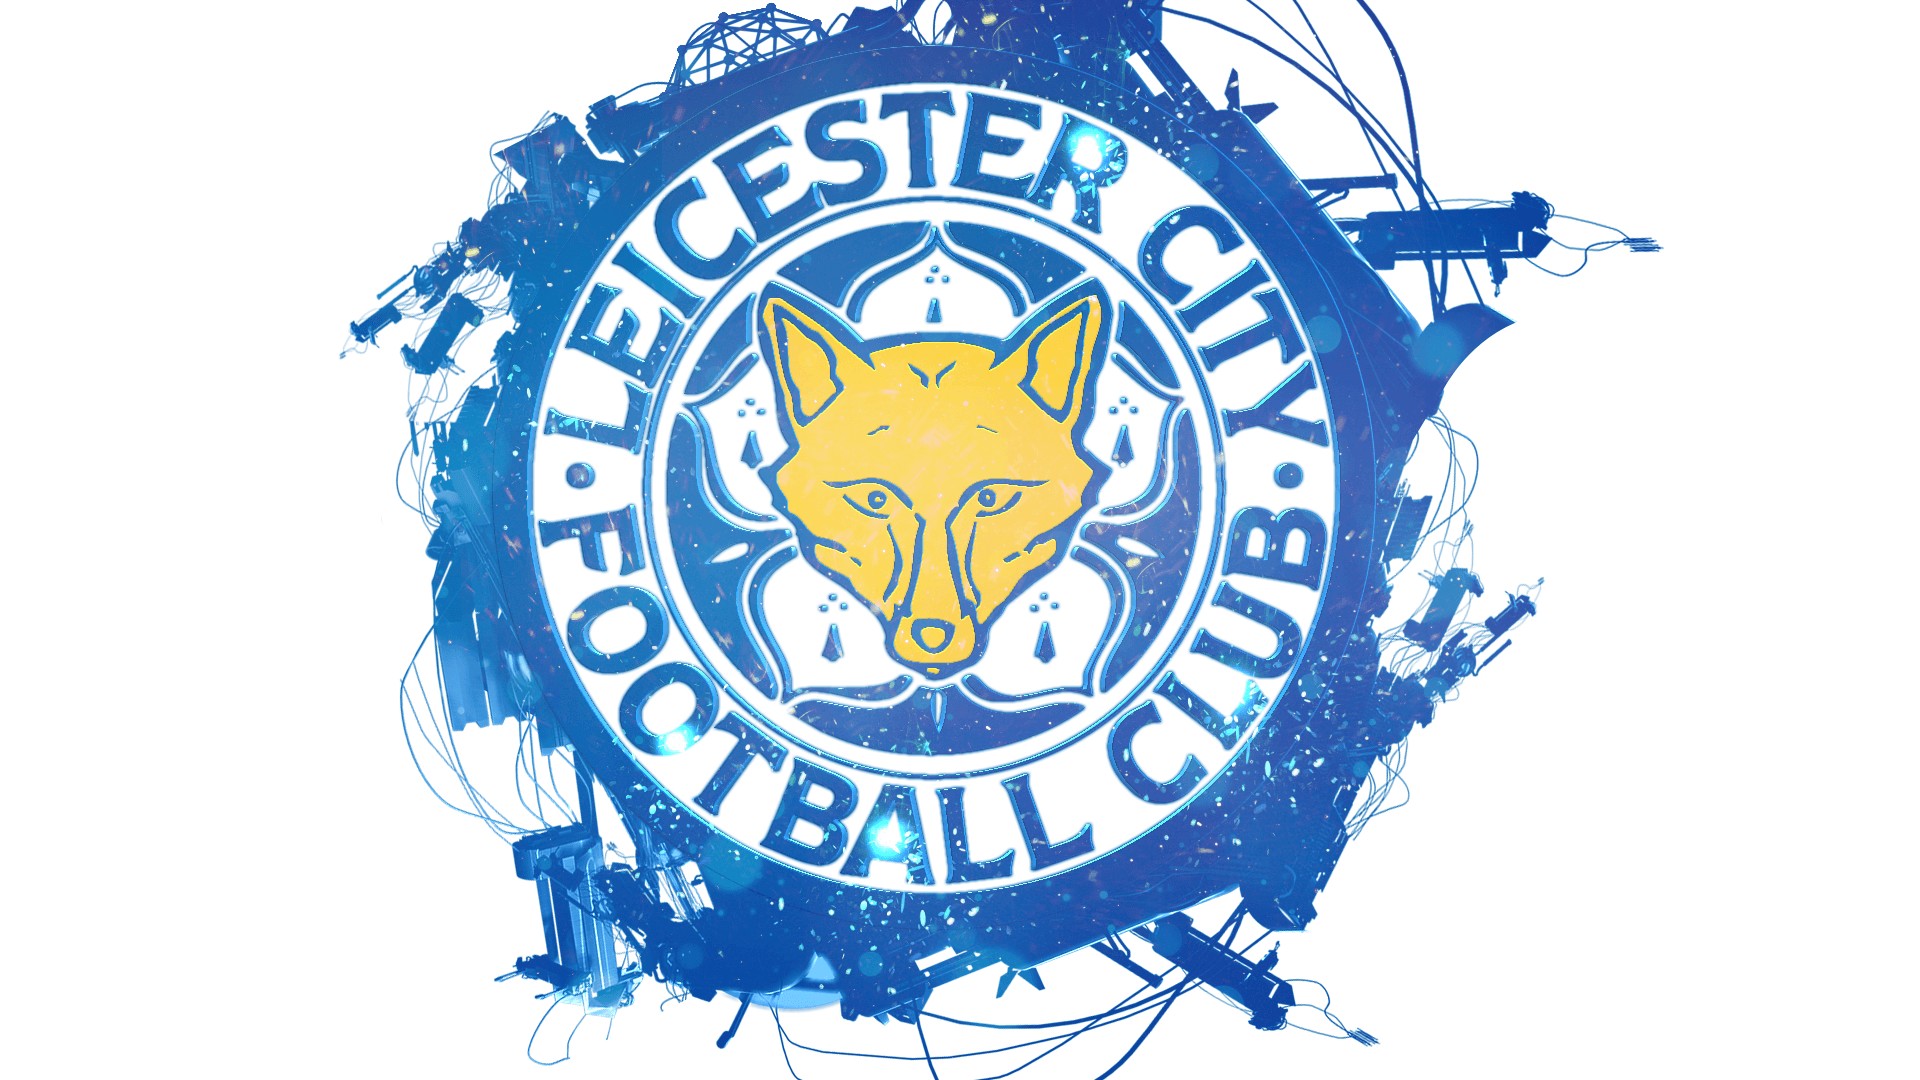 HD Leicester City Wallpapers with high-resolution 1920x1080 pixel. You can use this wallpaper for your Desktop Computers, Mac Screensavers, Windows Backgrounds, iPhone Wallpapers, Tablet or Android Lock screen and another Mobile device